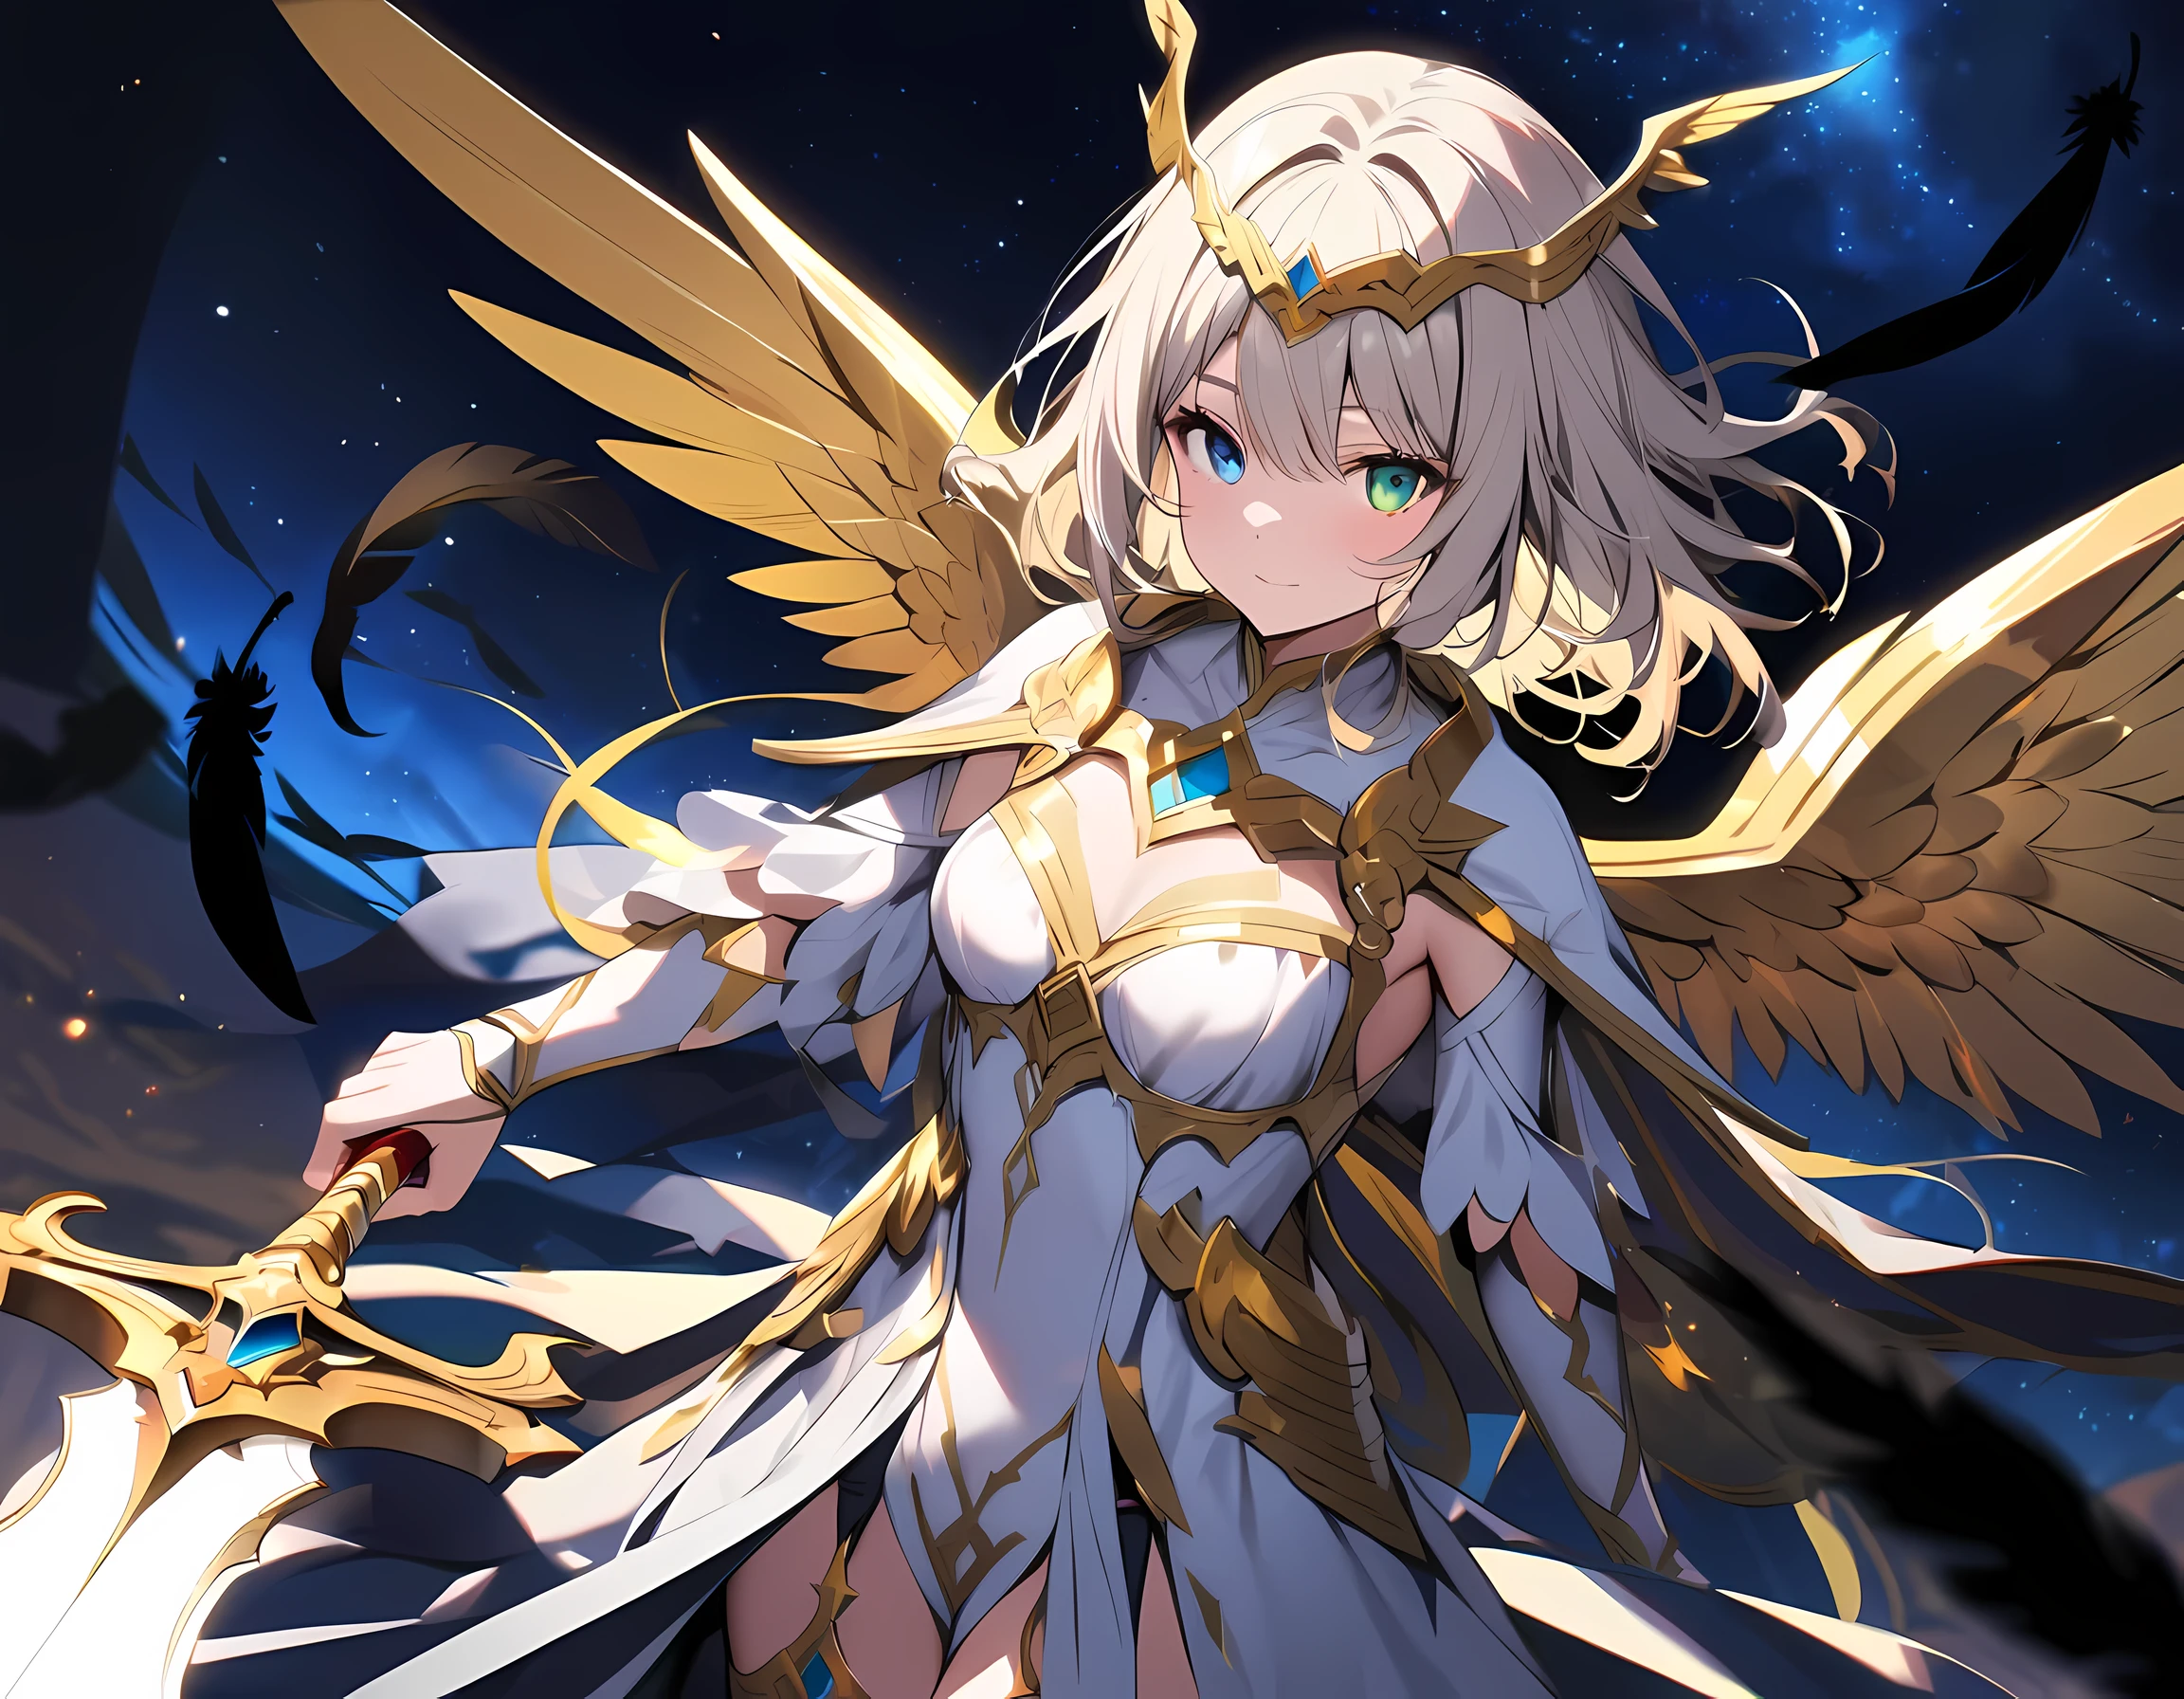 Mira has wavy silver hair with blonde highlights. Her heterochromia eyes, red on the left and blue on the right. She holds a holy sword in her left hand and a shadow blade in her right. She is wearing clothes bestowed by the gods as her ascension into a valkyrie goddess, flying through the night sky with her wings colored black and white as floating angel and black feathers cover the sky.